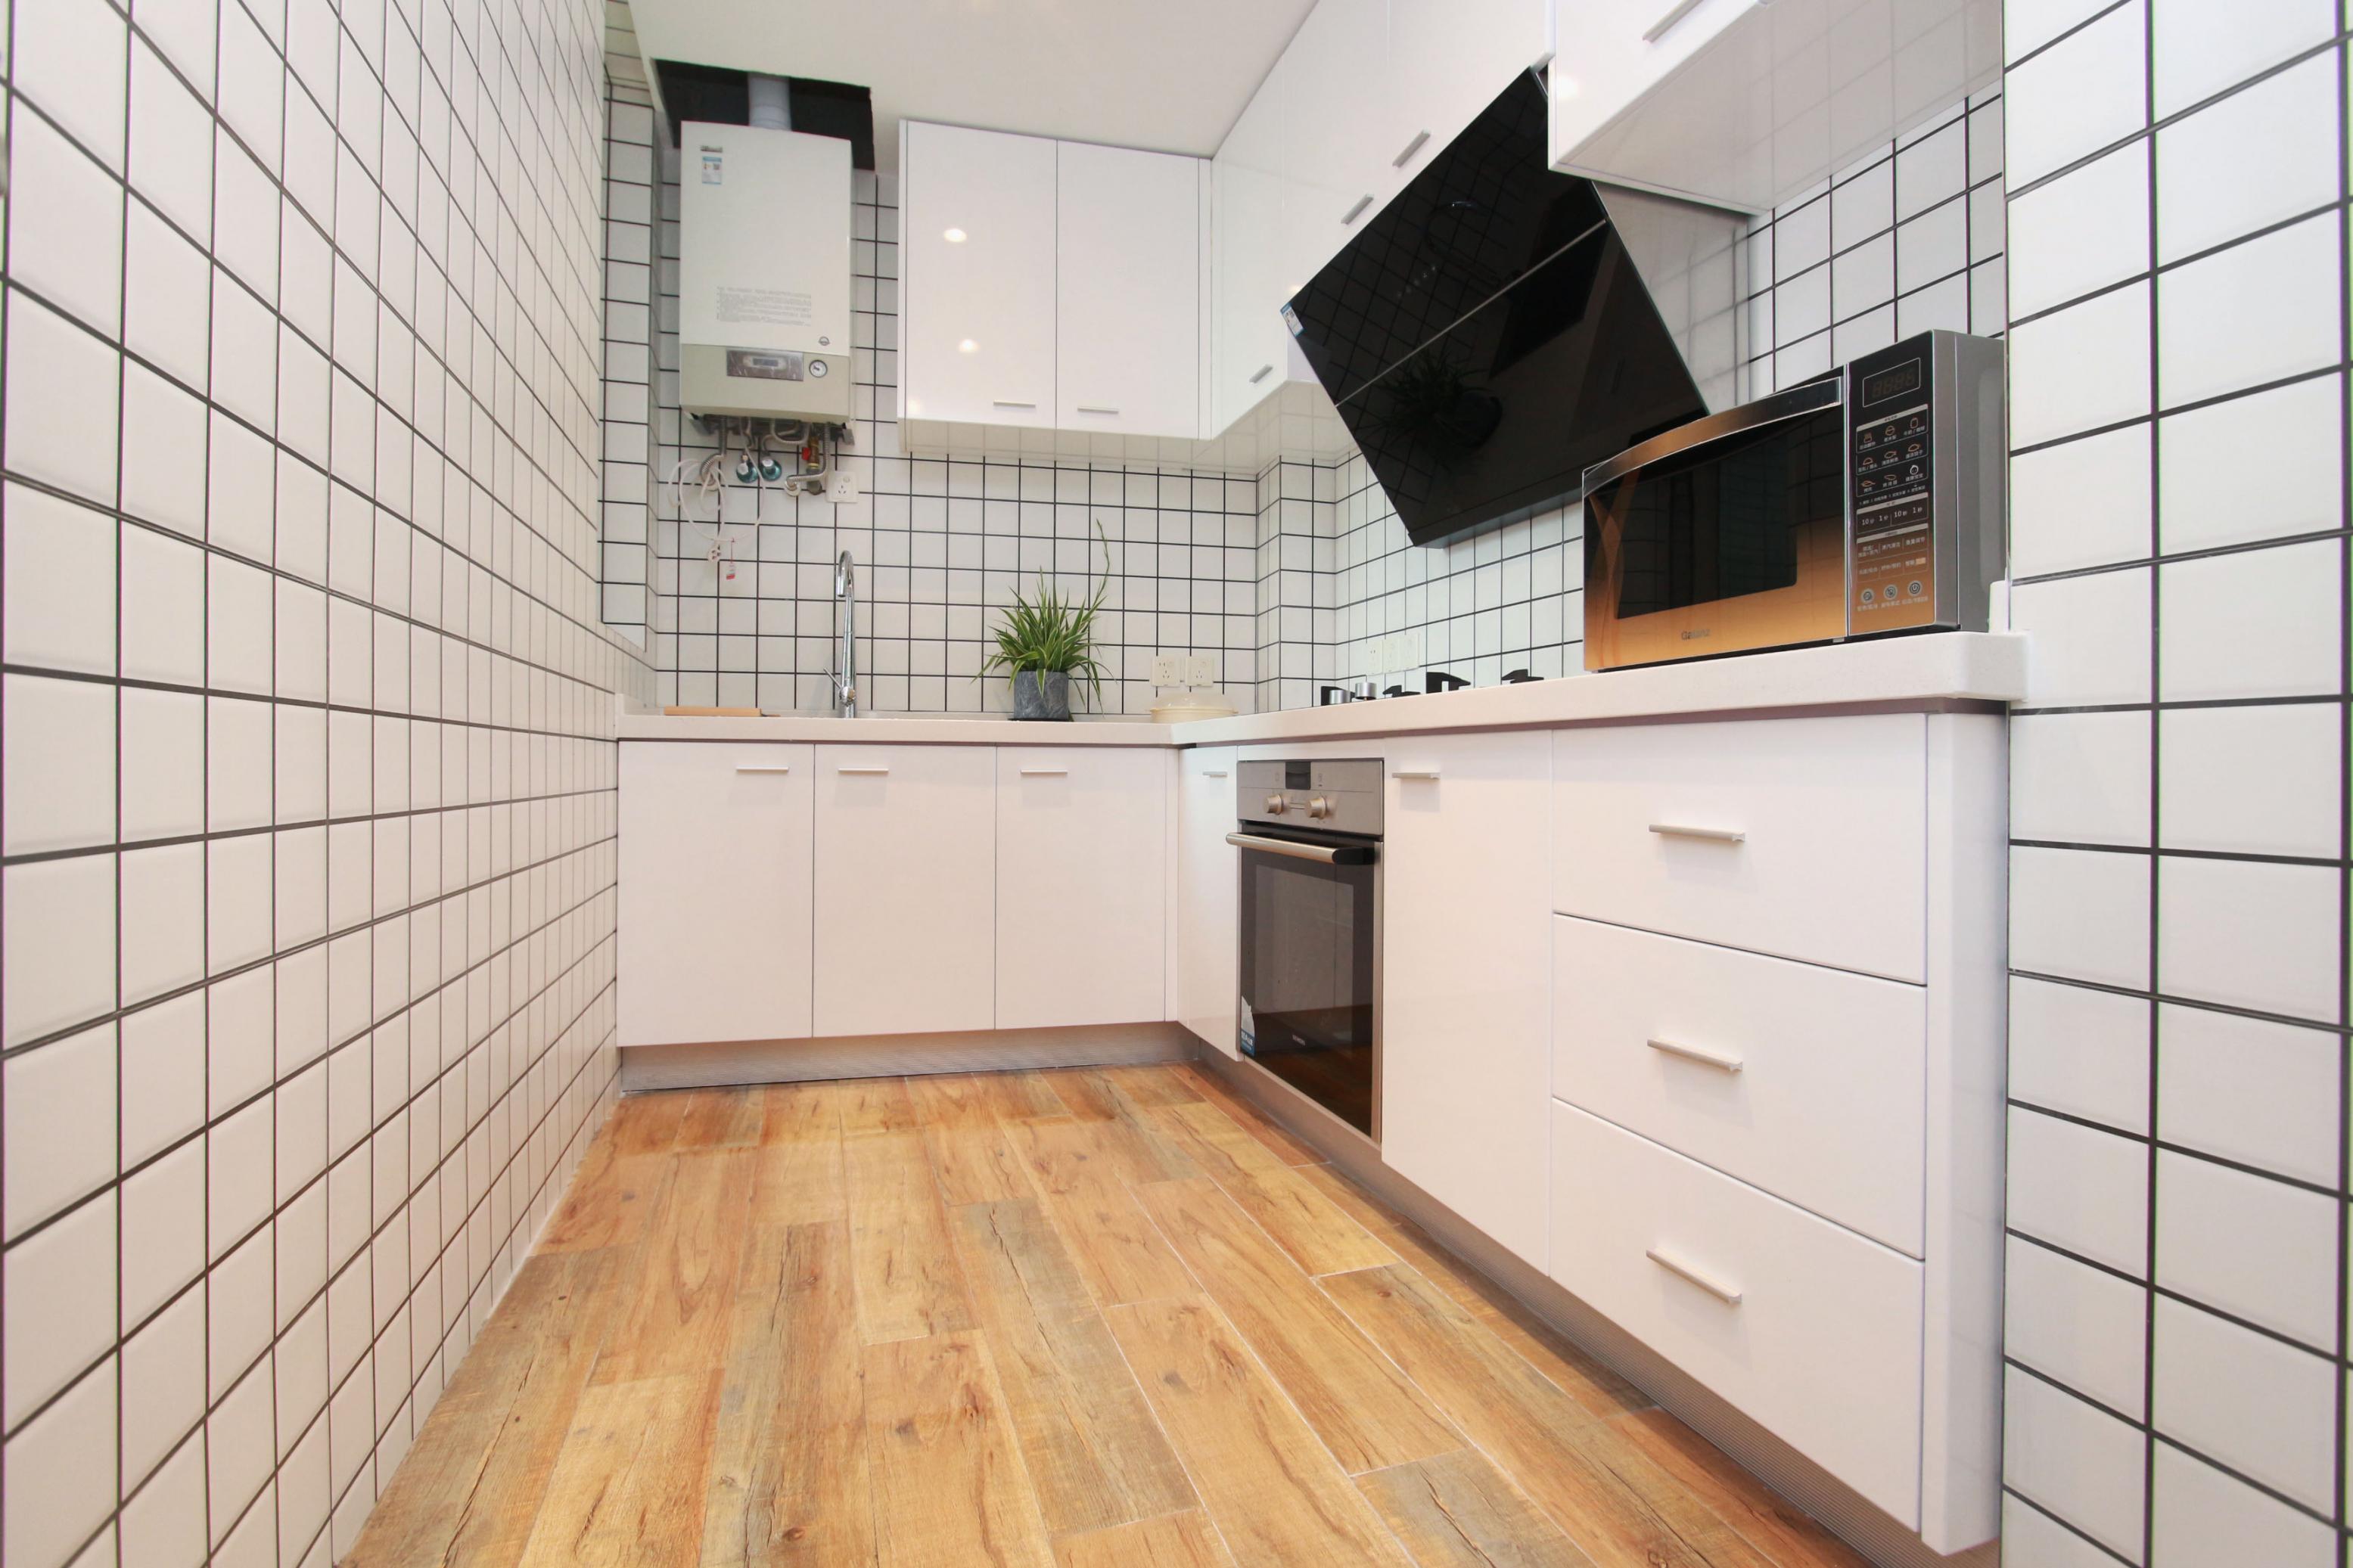 new kitchen Renovated Modern High-end Ladoll 1BR Apt LN 2/12/13 for Rent in Shanghai